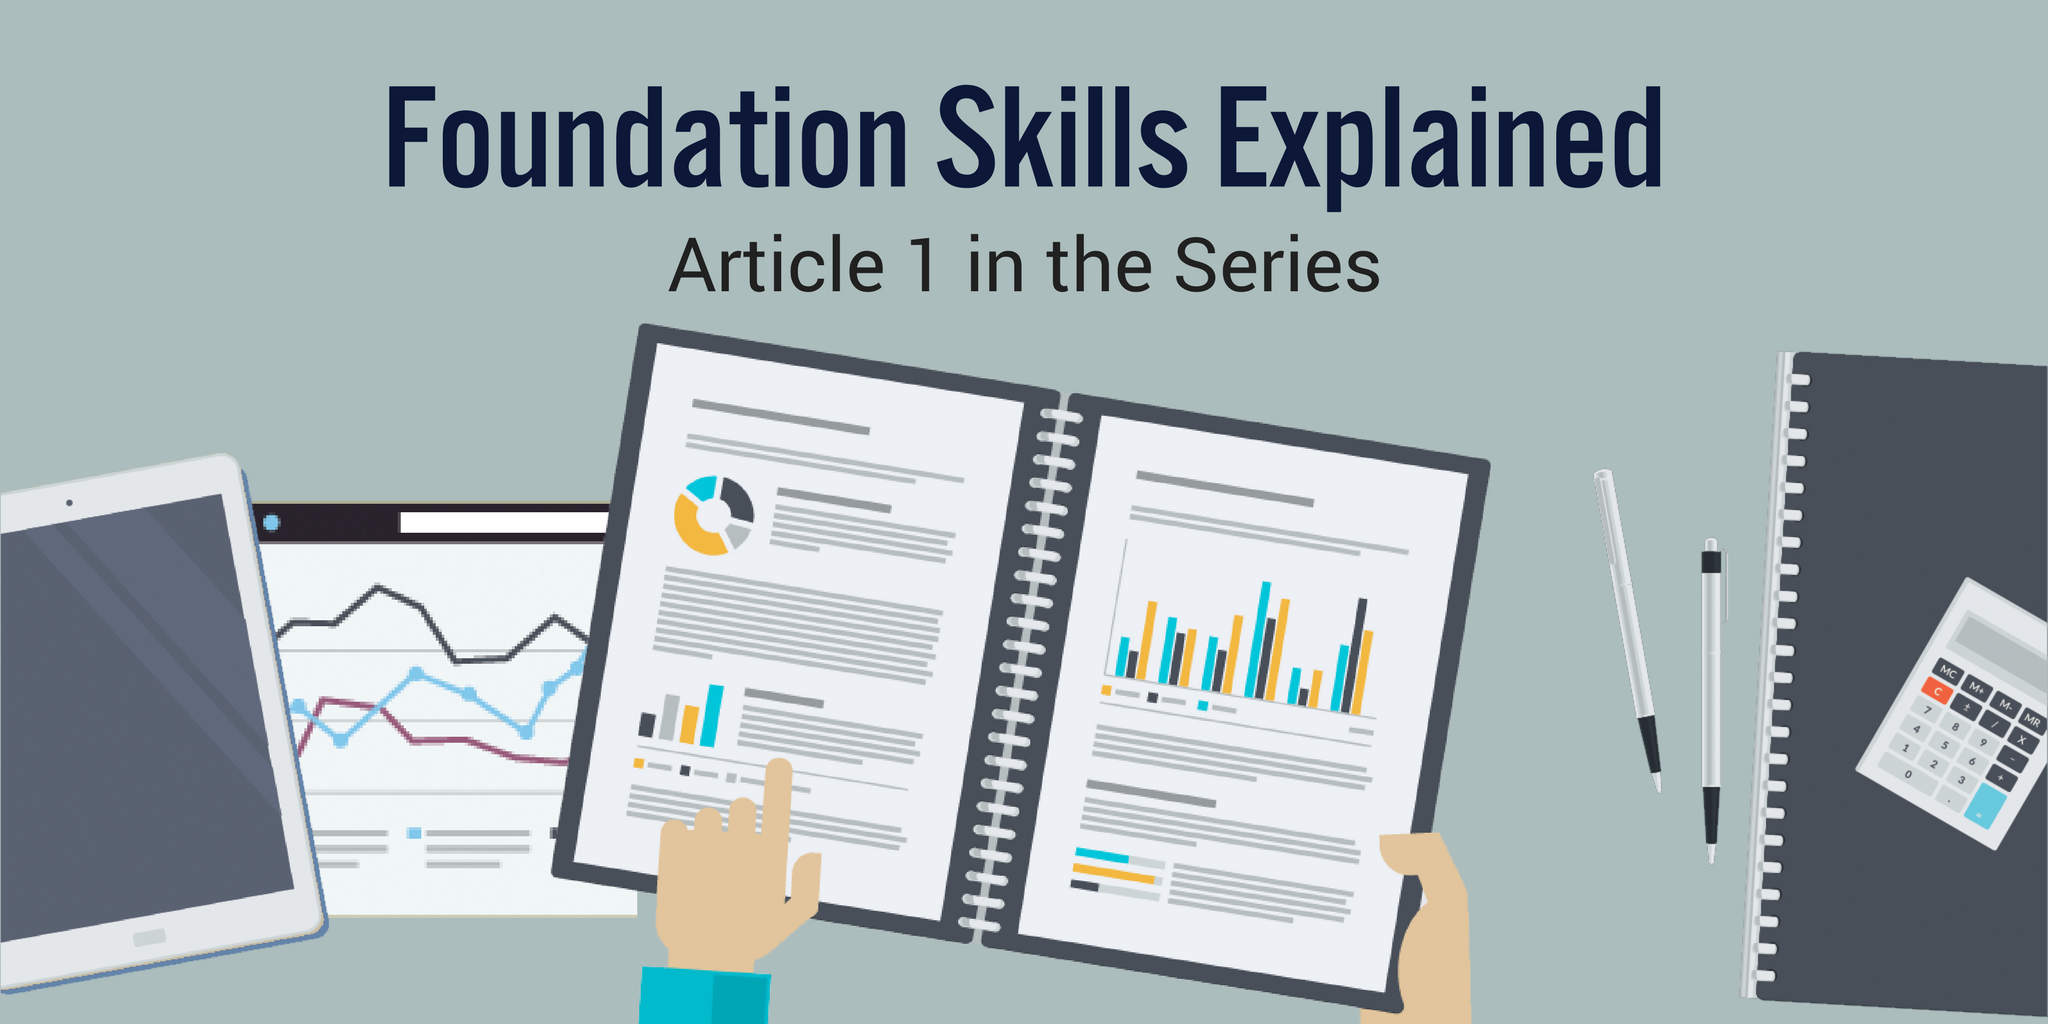 Foundation Skills Explained - Article 1 in the Series